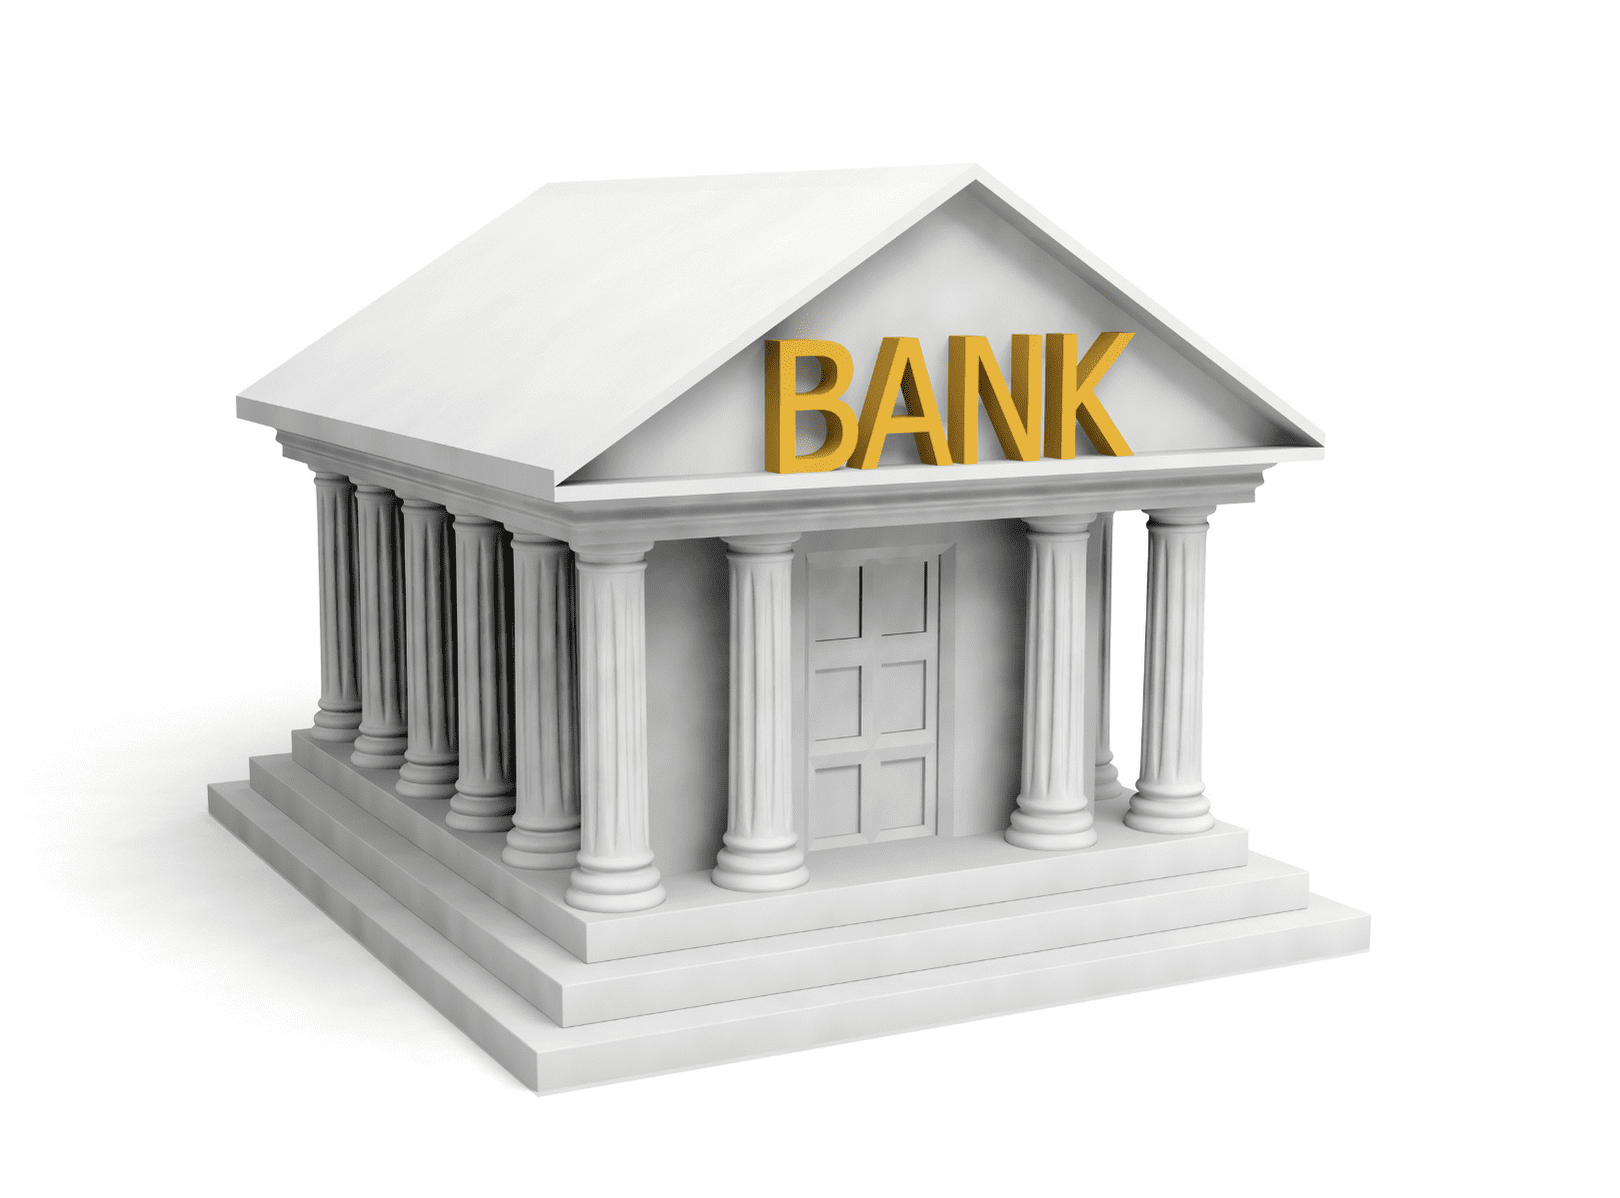 A gray representation of a bank building with the word Bank in yellow